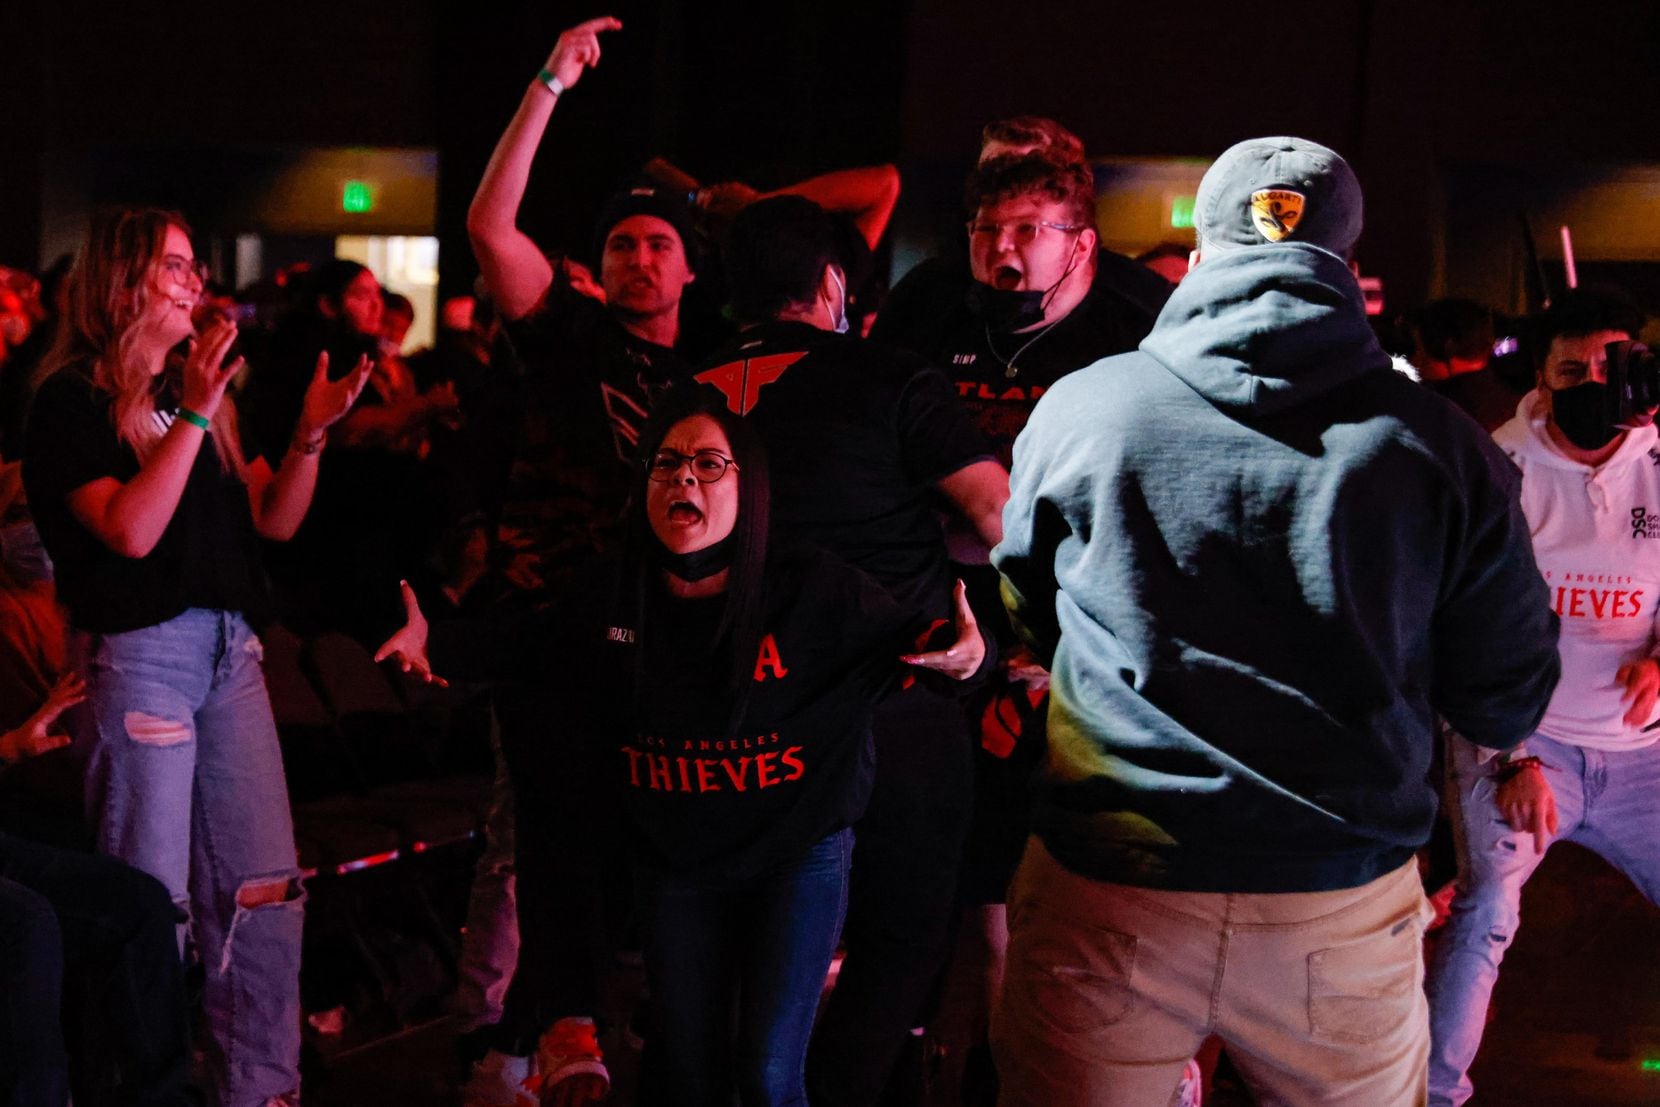 Los Angeles Thieves fans reacts as the team wins over OpTic Texas during a Call of Duty...